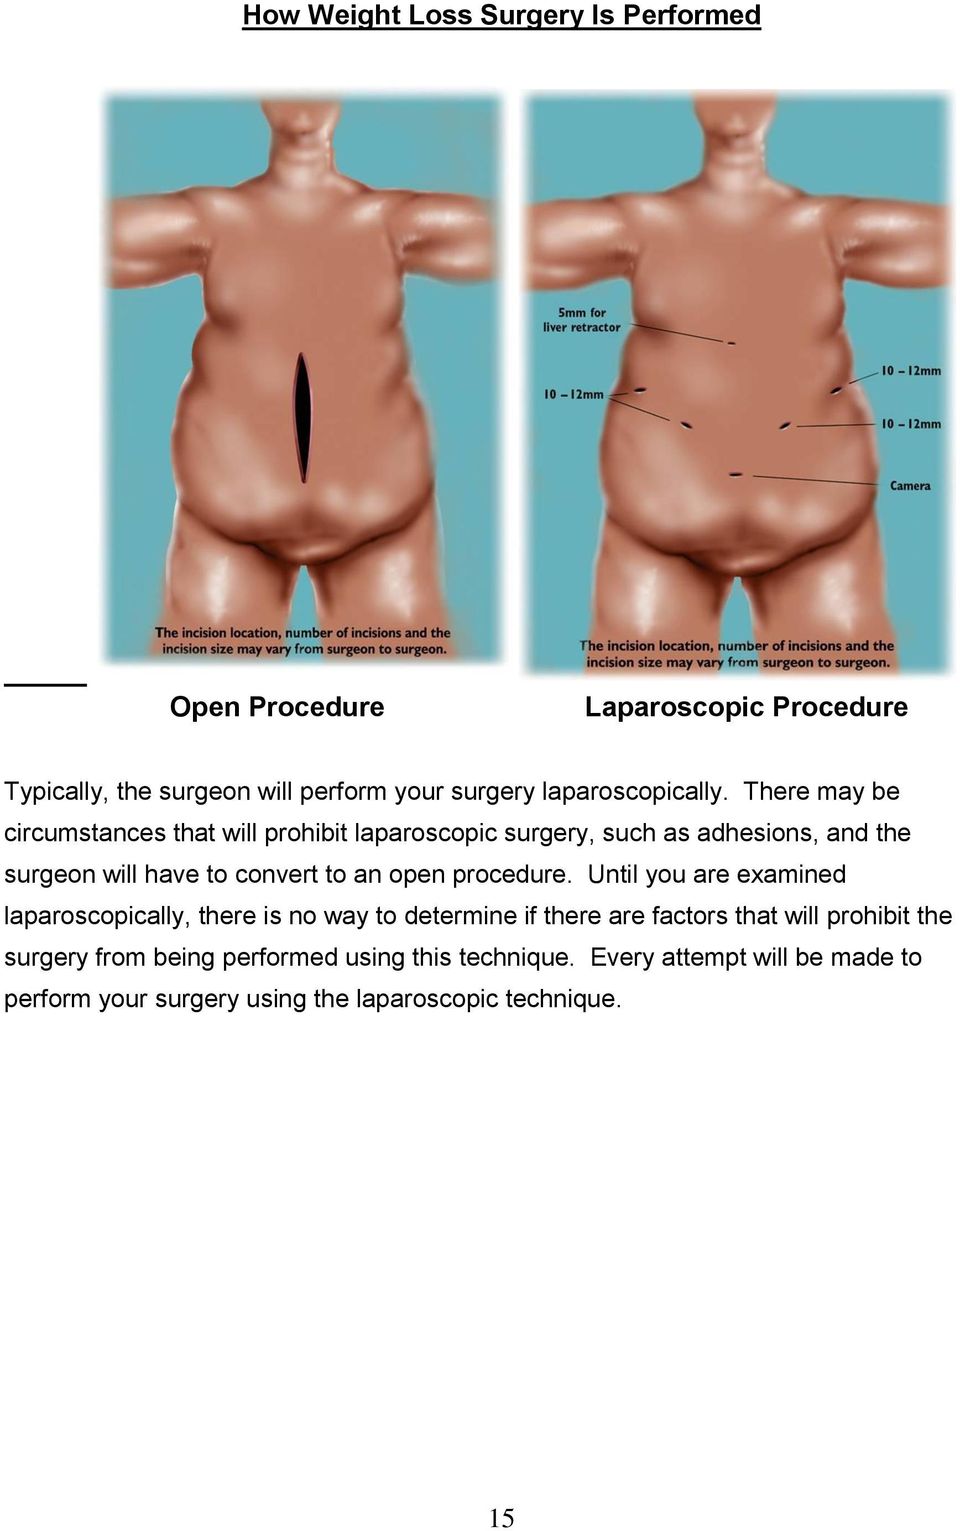 There may be circumstances that will prohibit laparoscopic surgery, such as adhesions, and the surgeon will have to convert to an open